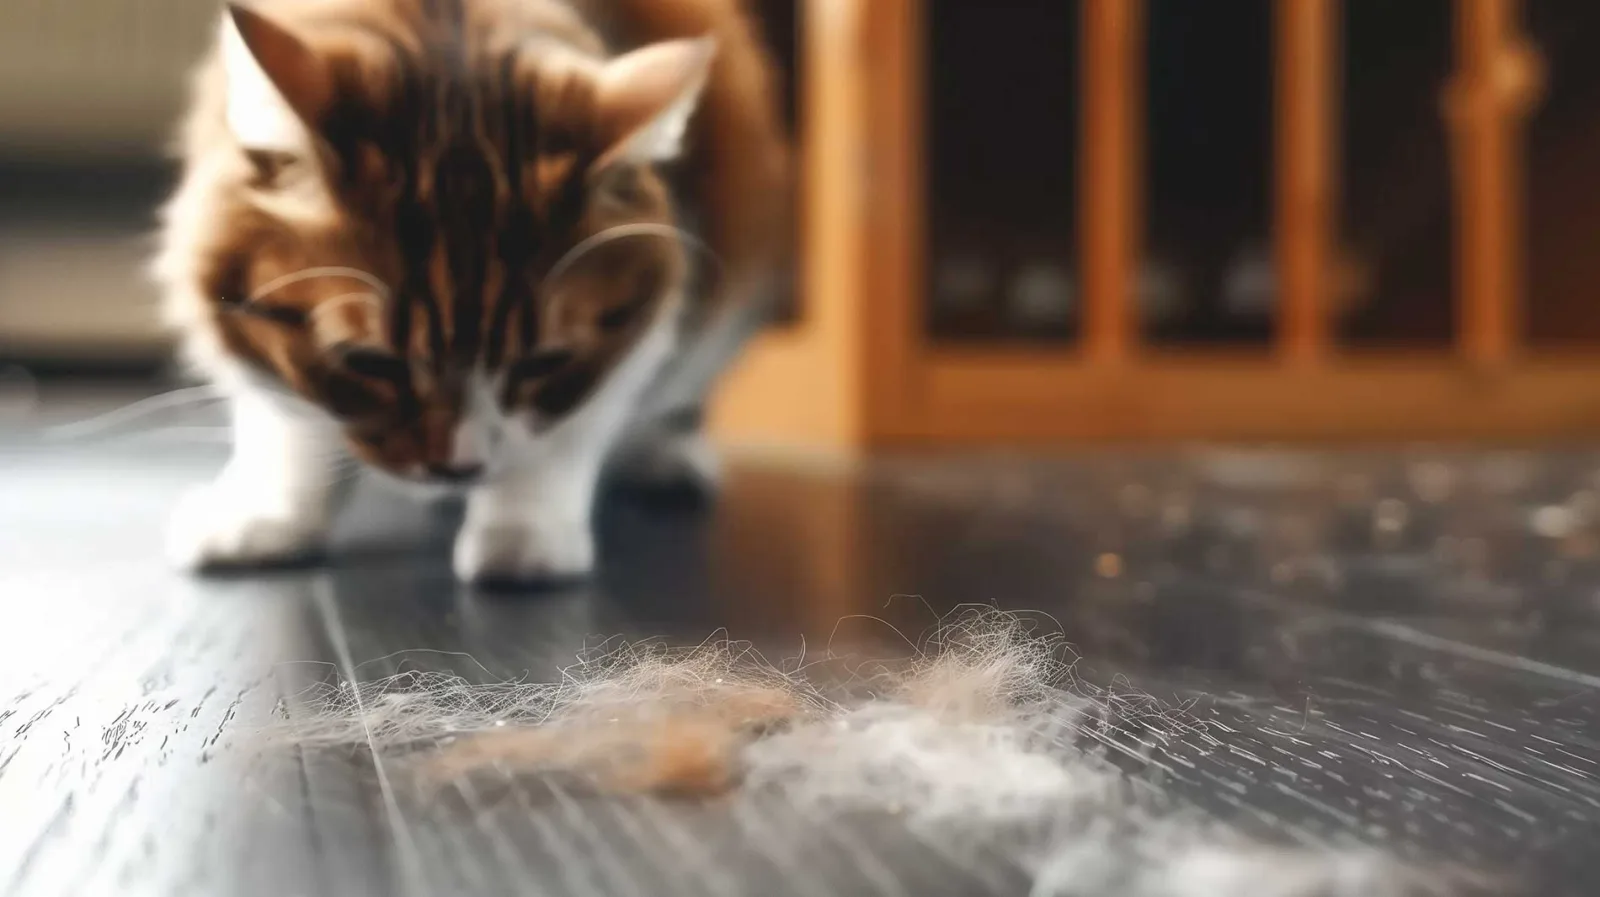 An image depicting a large, fuzzy hairball on a wooden floor, with a cat sitting in the background right behind it.